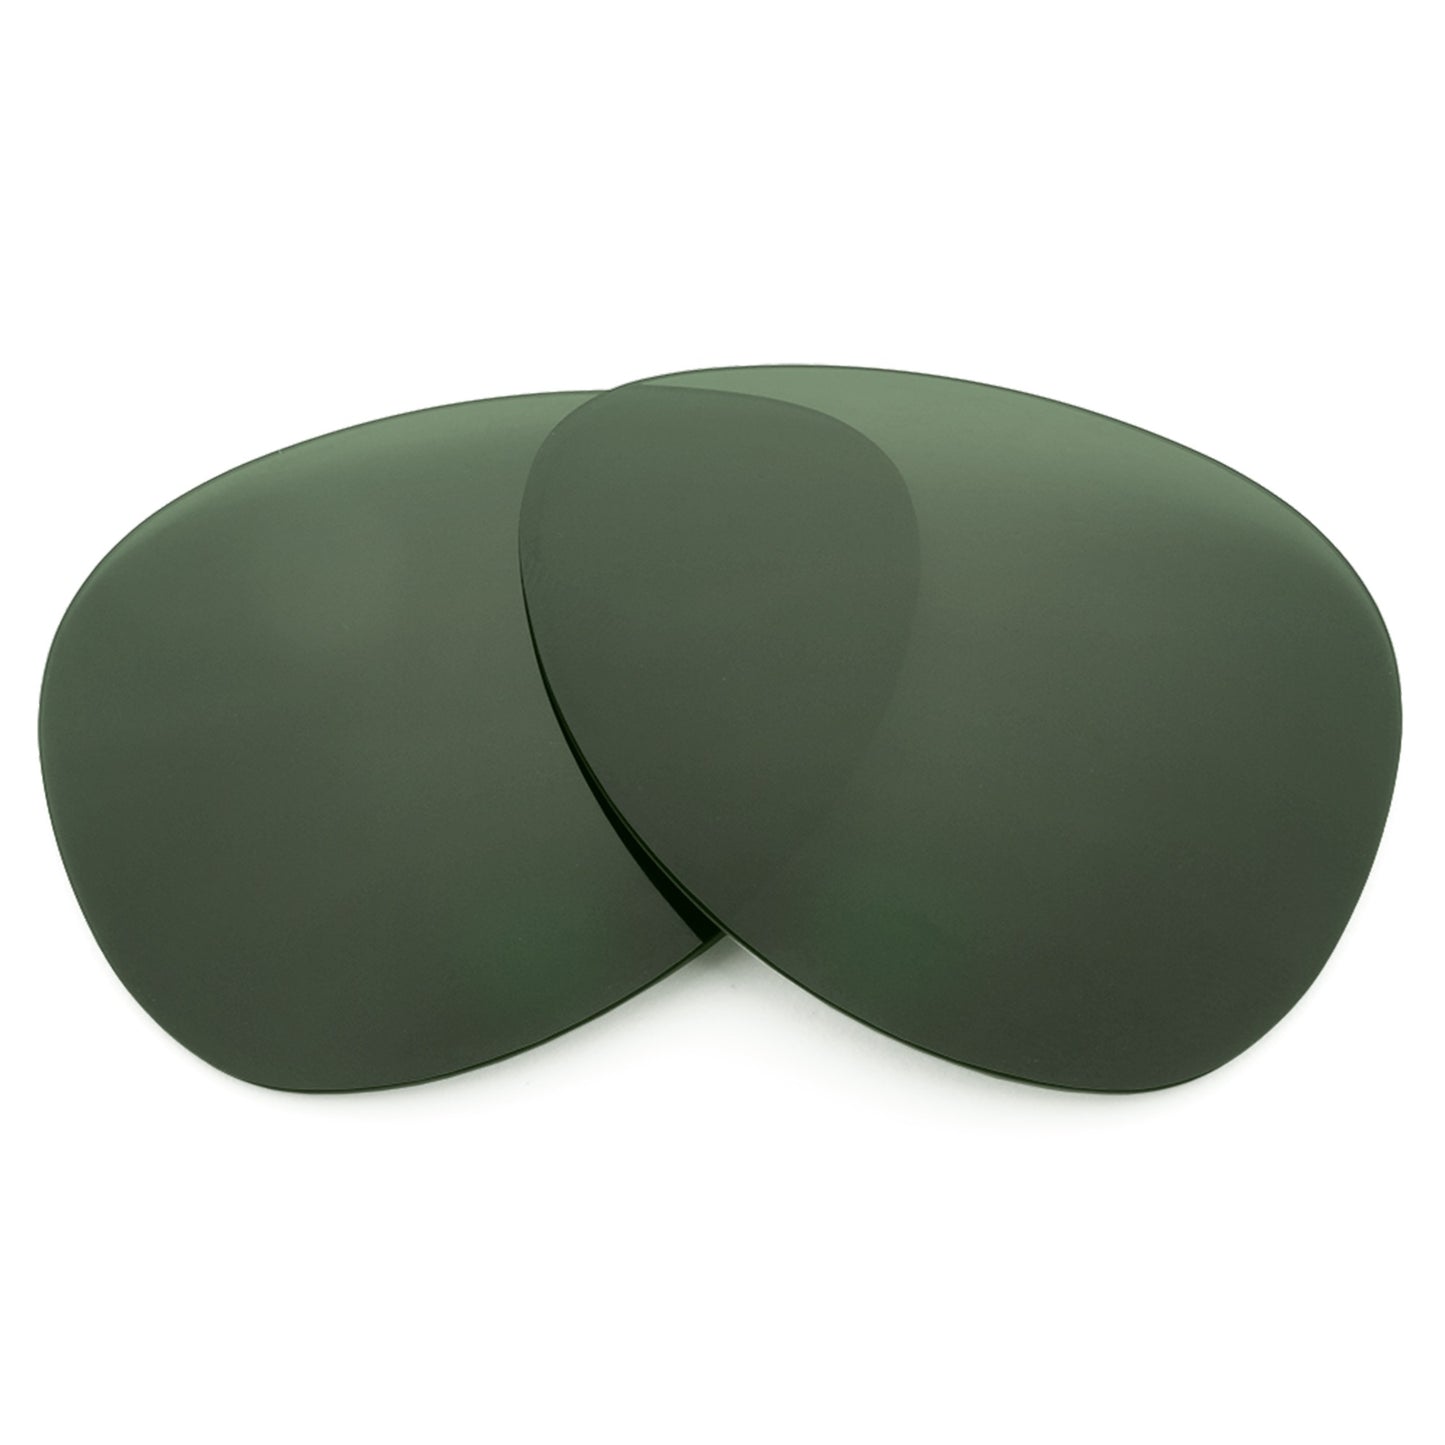 Revant replacement lenses for Oakley Crosshair Ti (61mm) Non-Polarized Gray Green